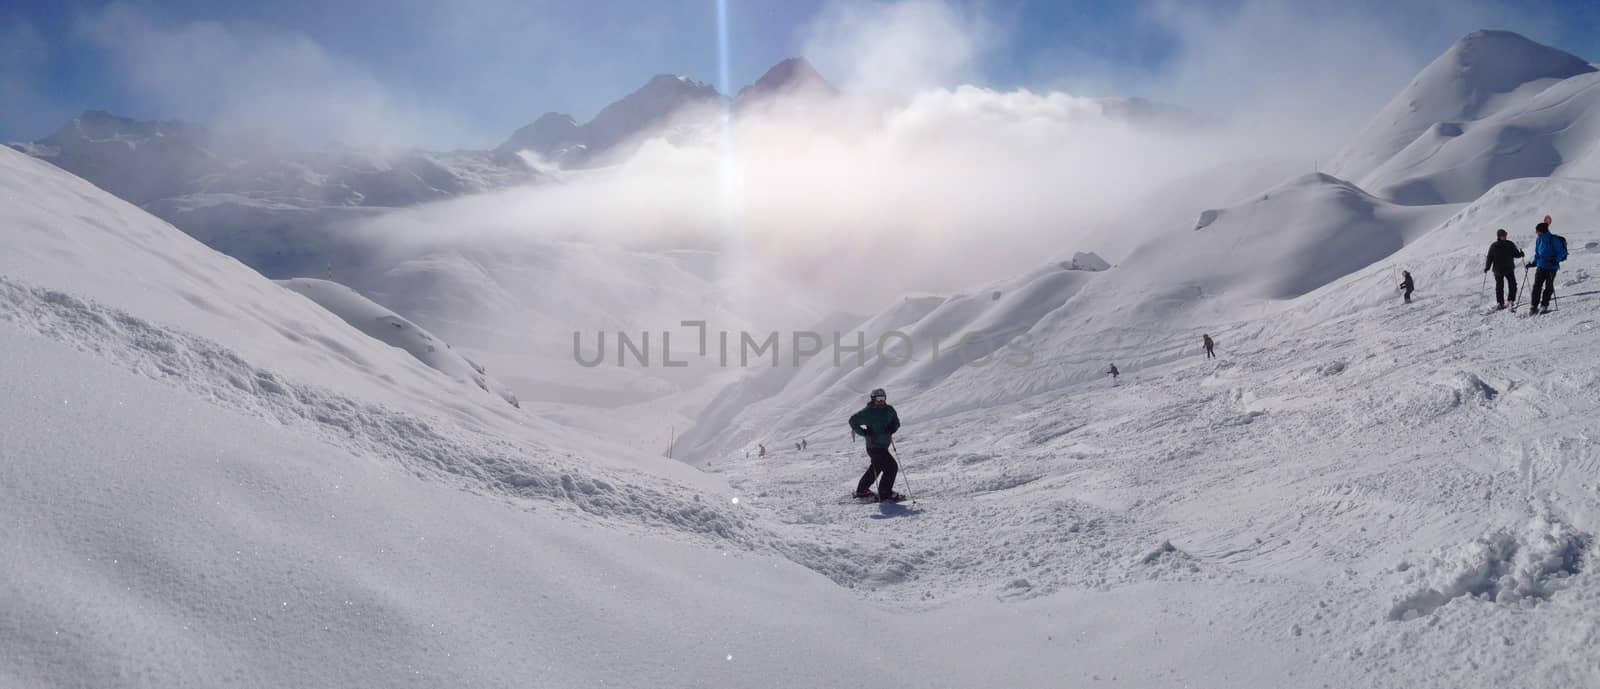 A skier on the piste in front of beautiful mountains by chrisga